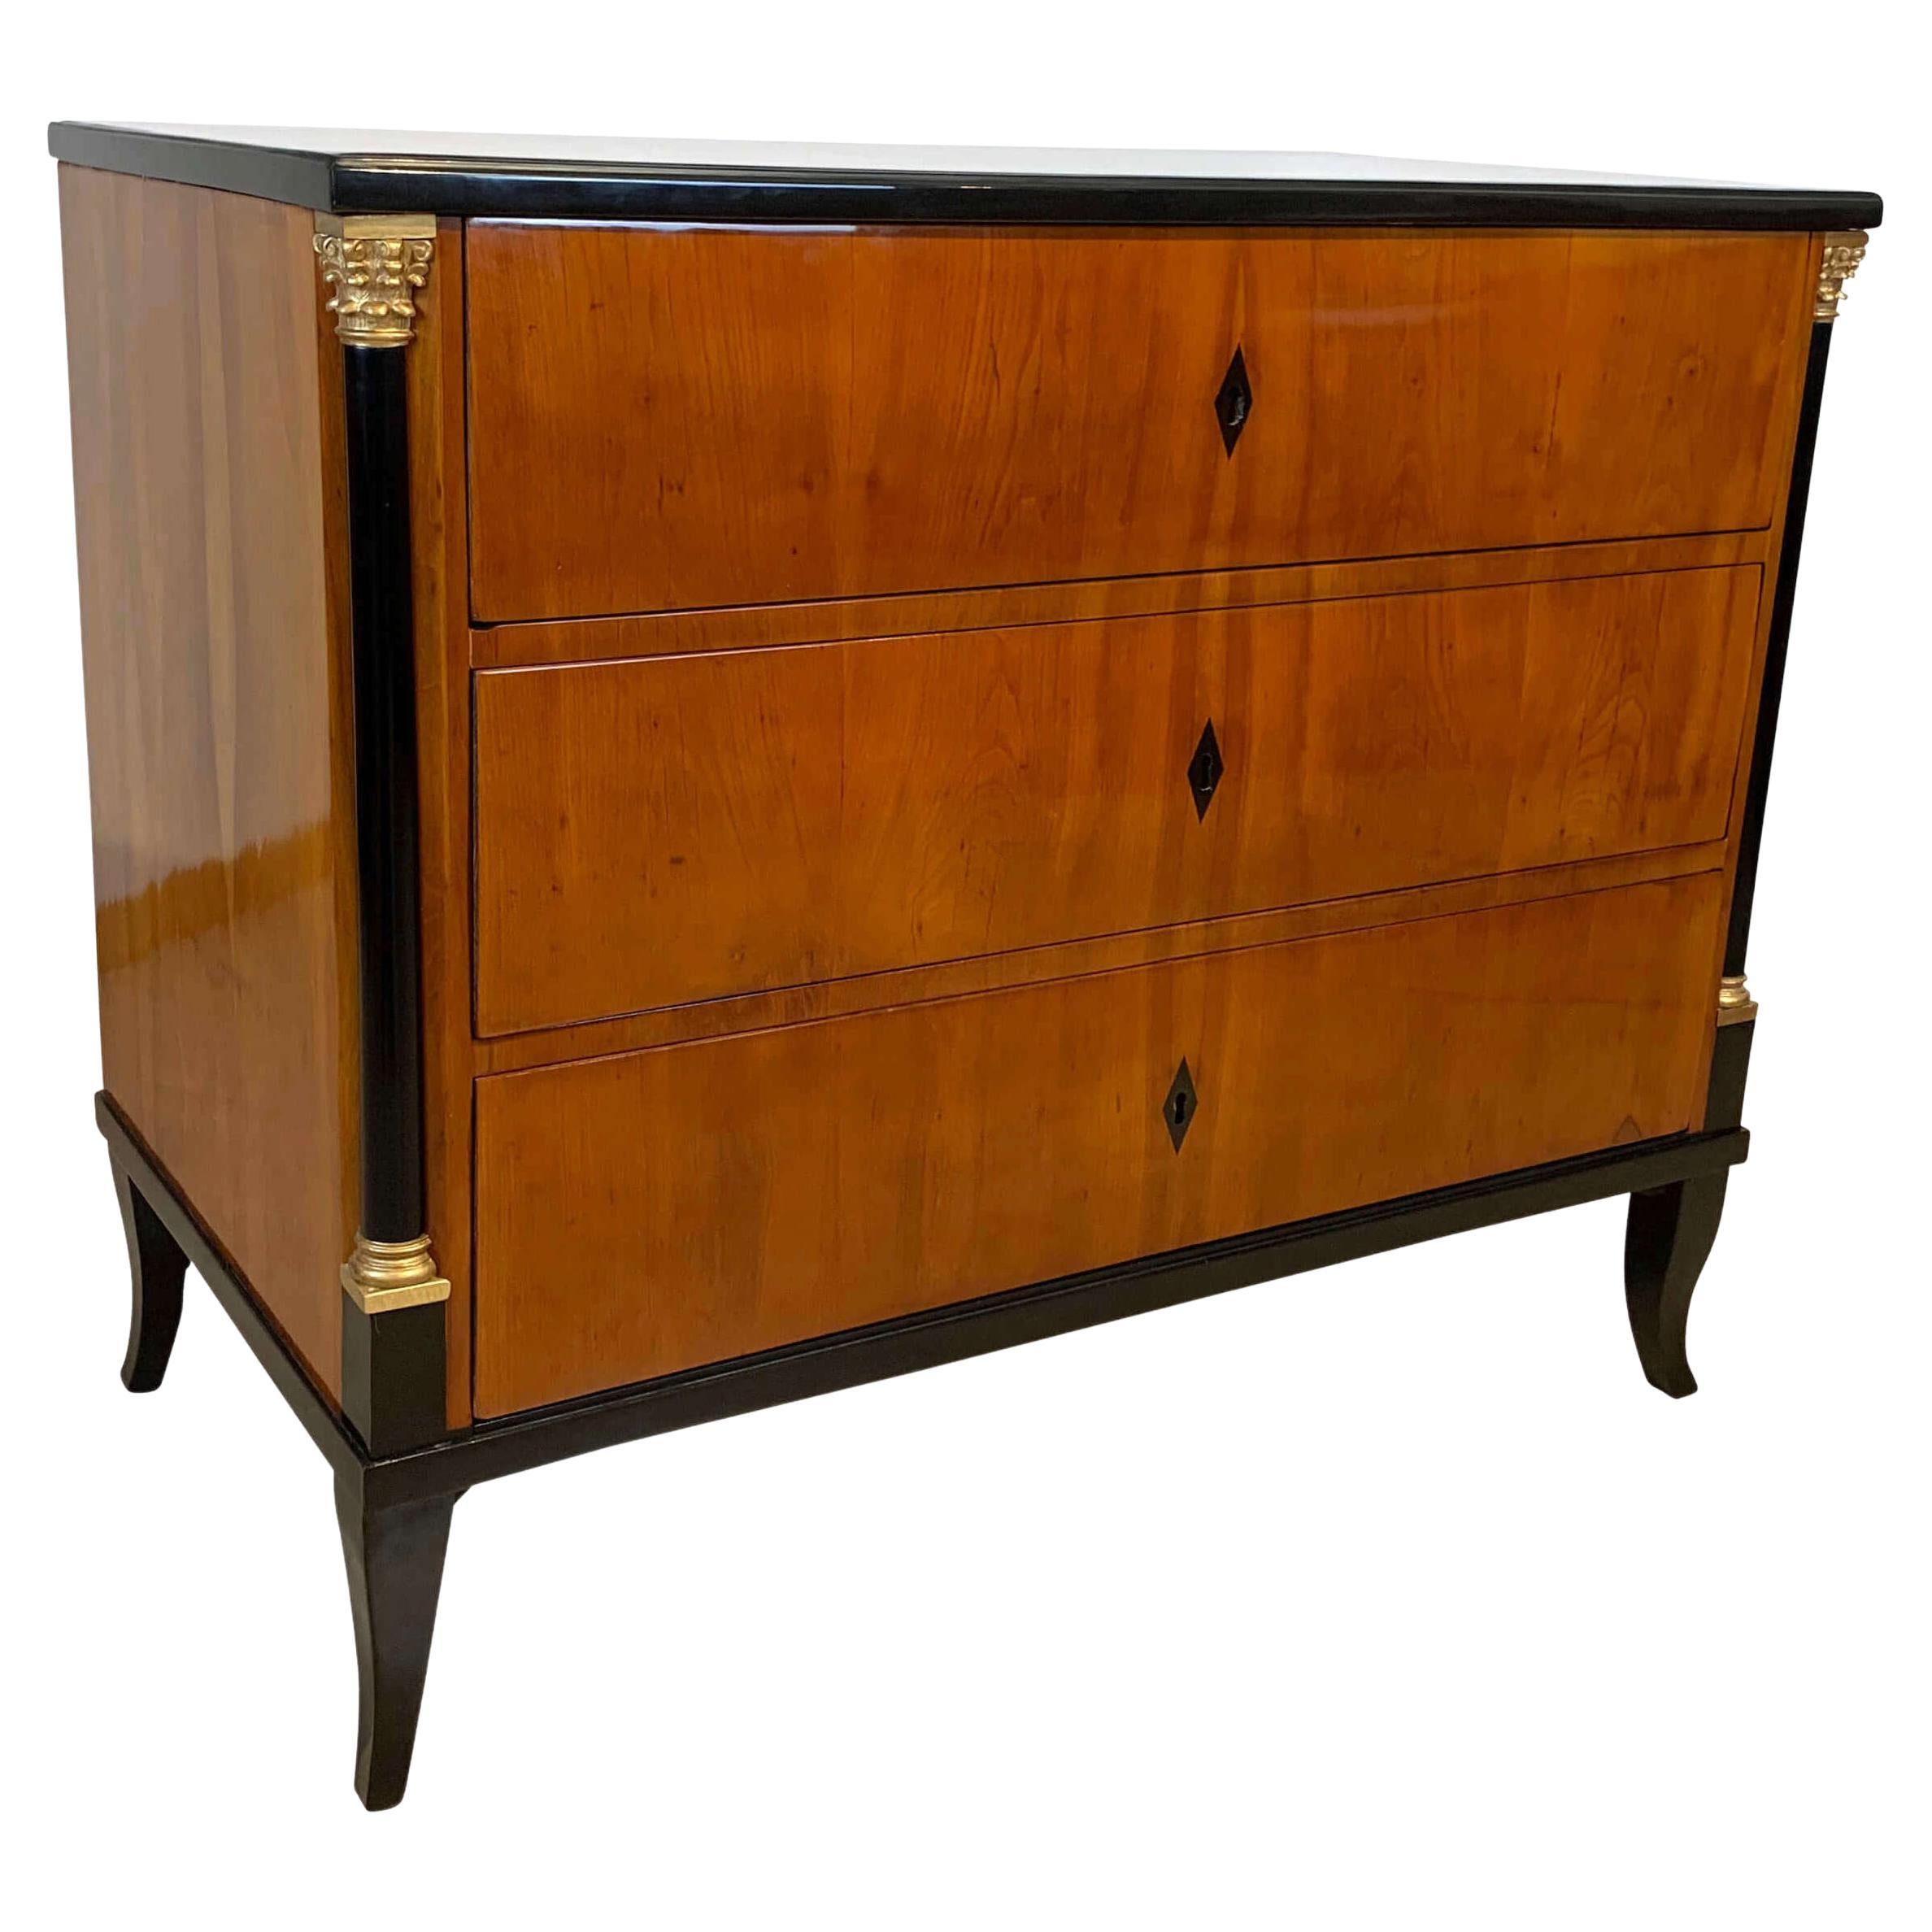 Rare small neoclassical early Biedermeier Commode or Chest of Drawers from South Germany around 1820.
Veneered in wonderful bright cherry wood on spruce softwood. Ebonized legs and cornice. Inlaid and ebonized key coats of arms. Ebonized Half